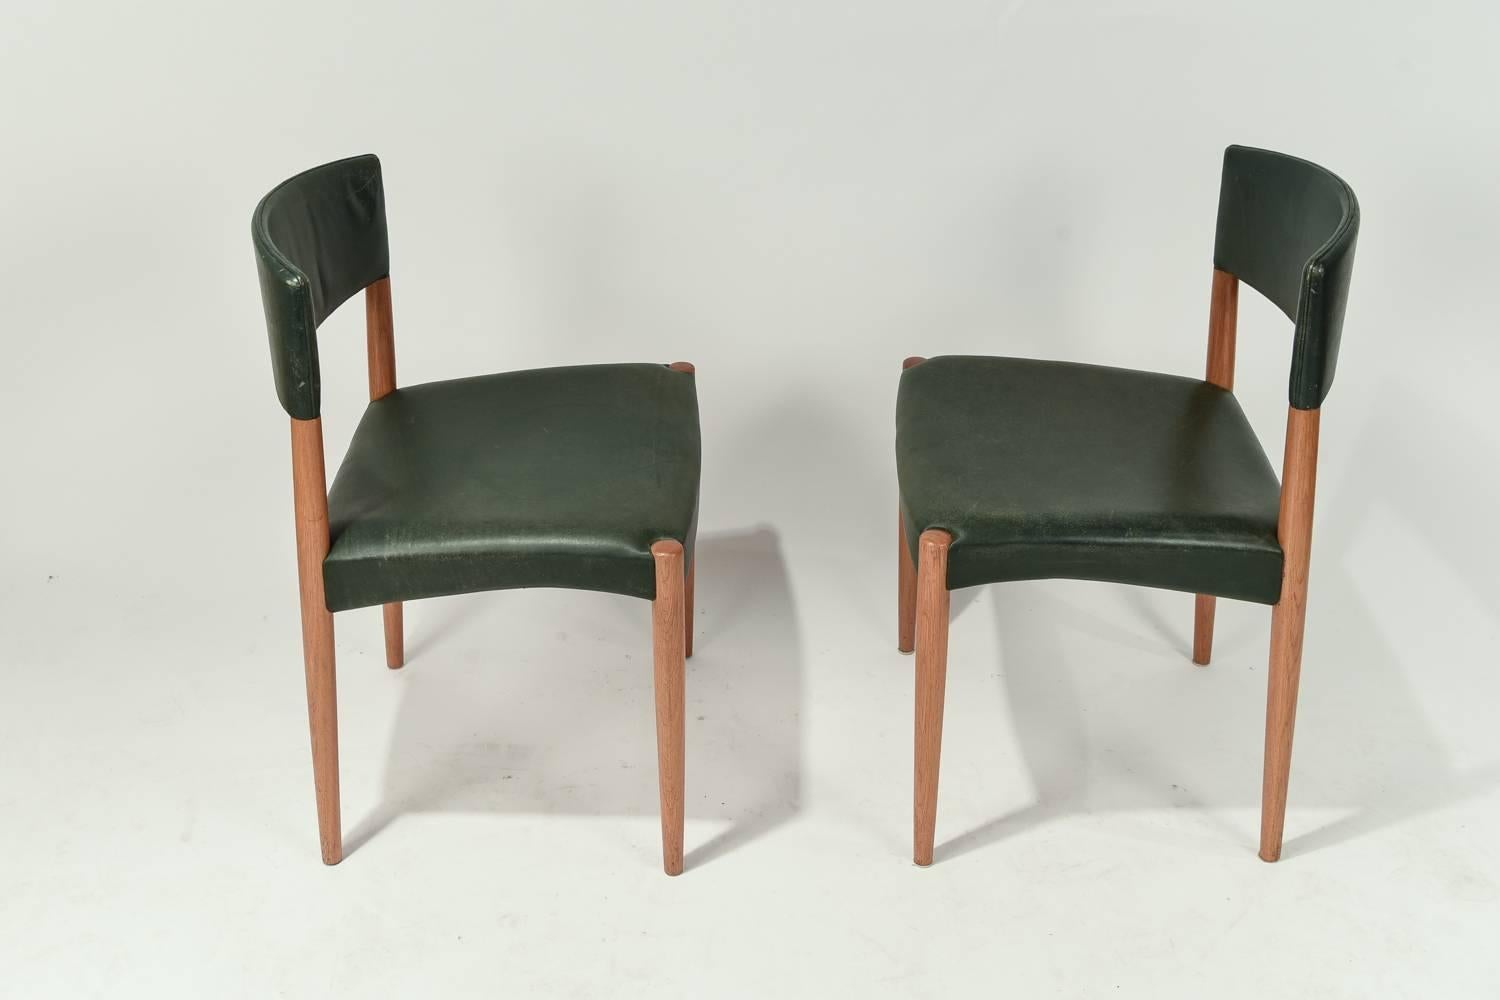 A wonderful set of eight side or dining chairs in leather and oak by Ludvig Pontoppidan.